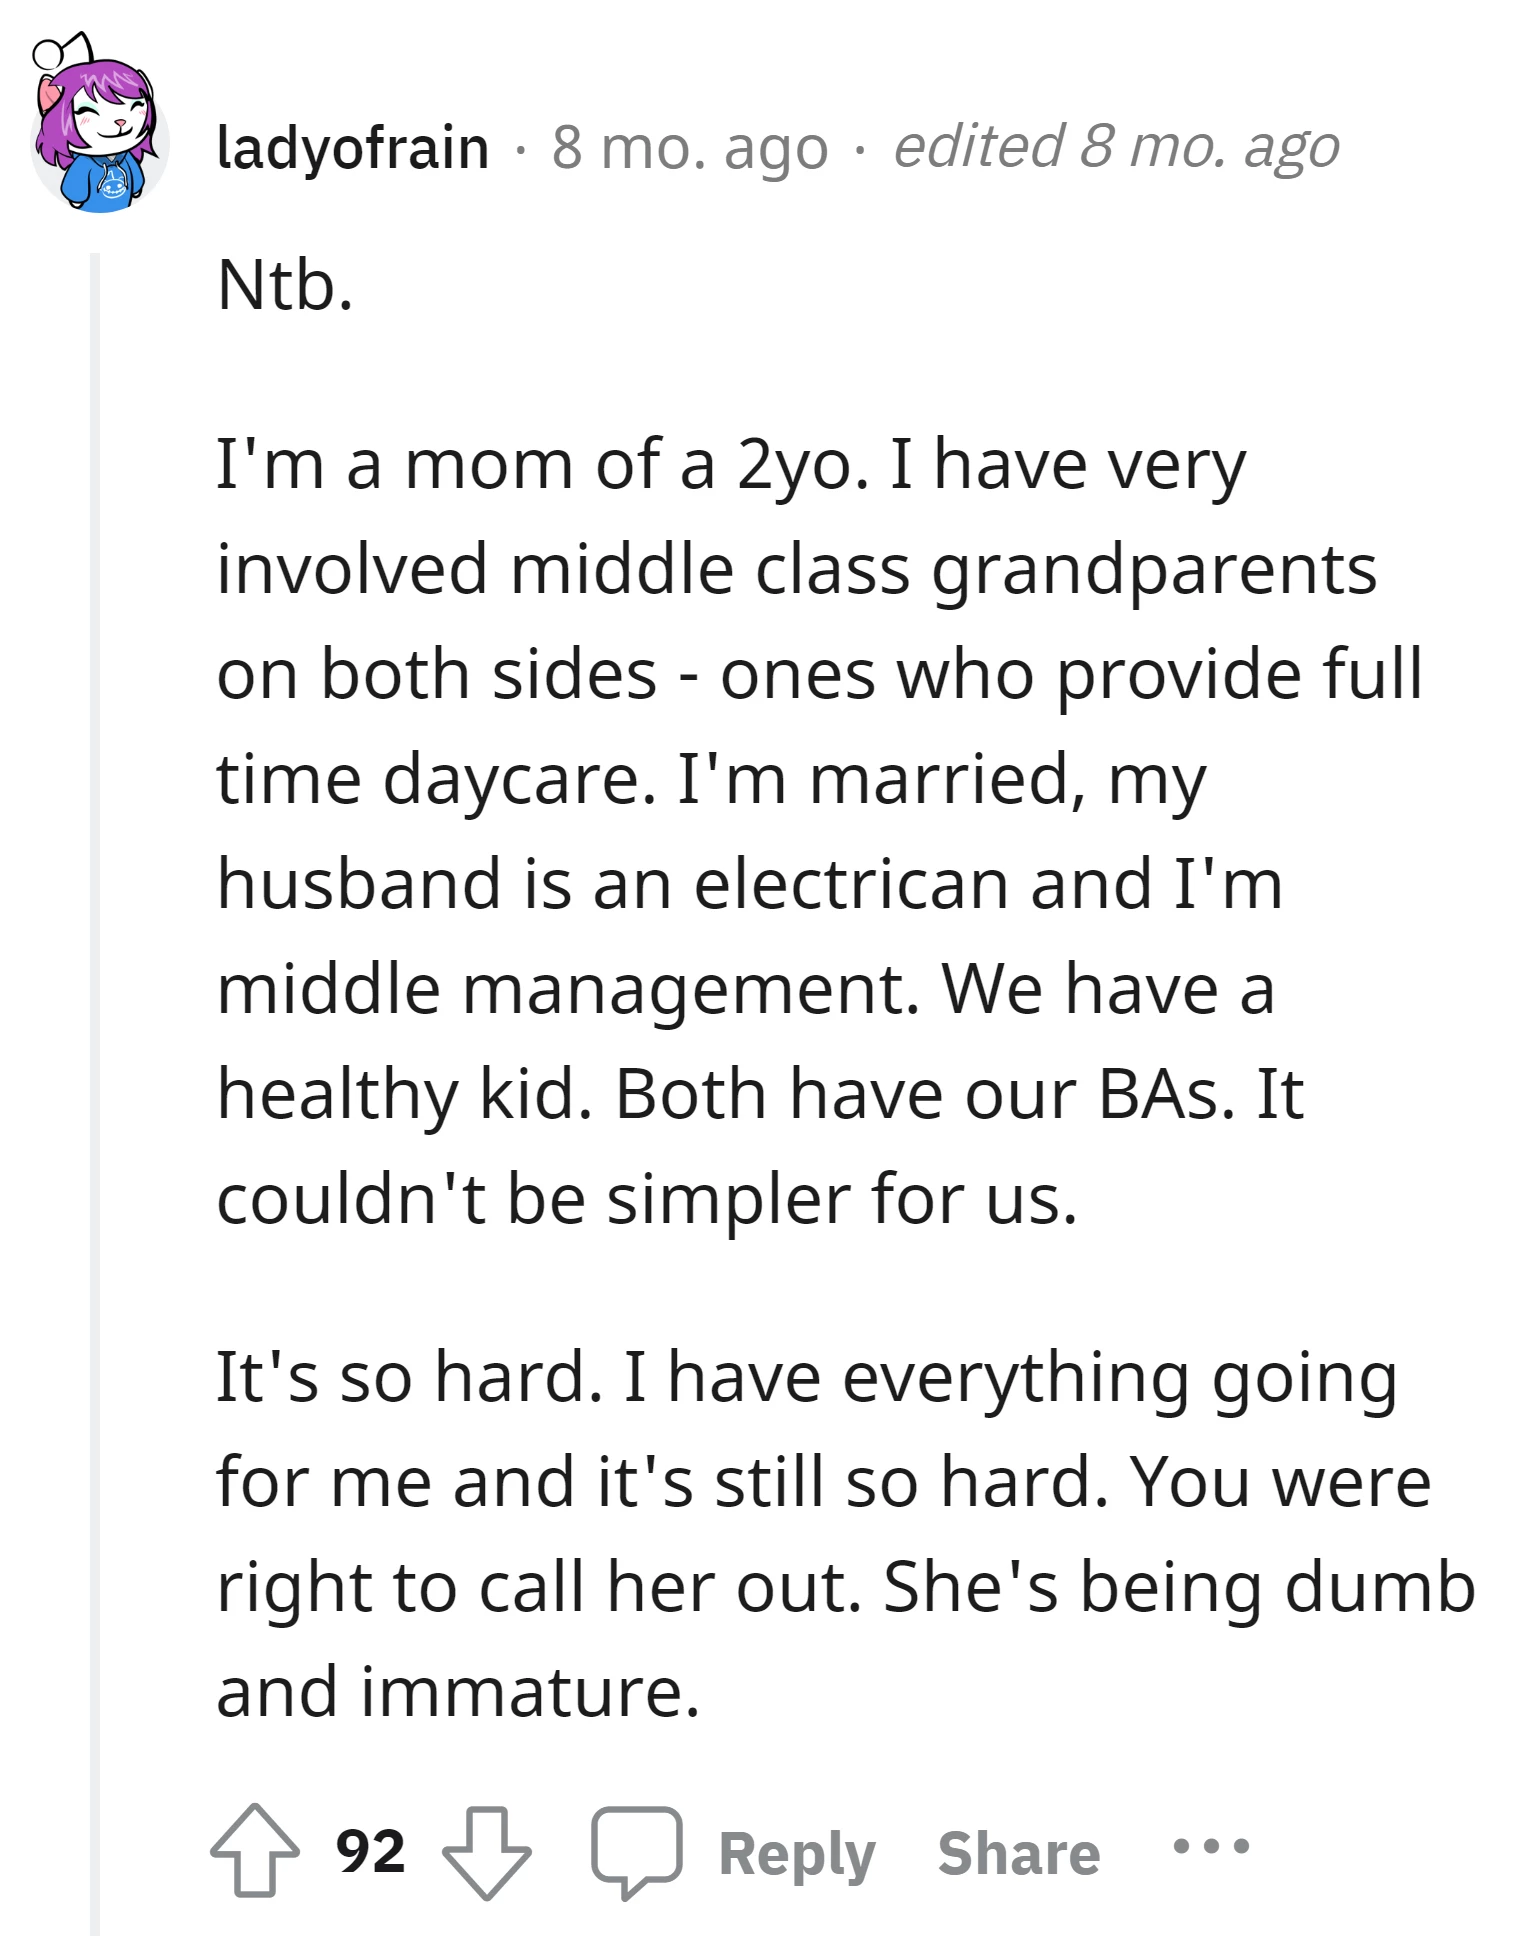 Redditor criticizes the friend's impractical and immature approach to having a baby at 16